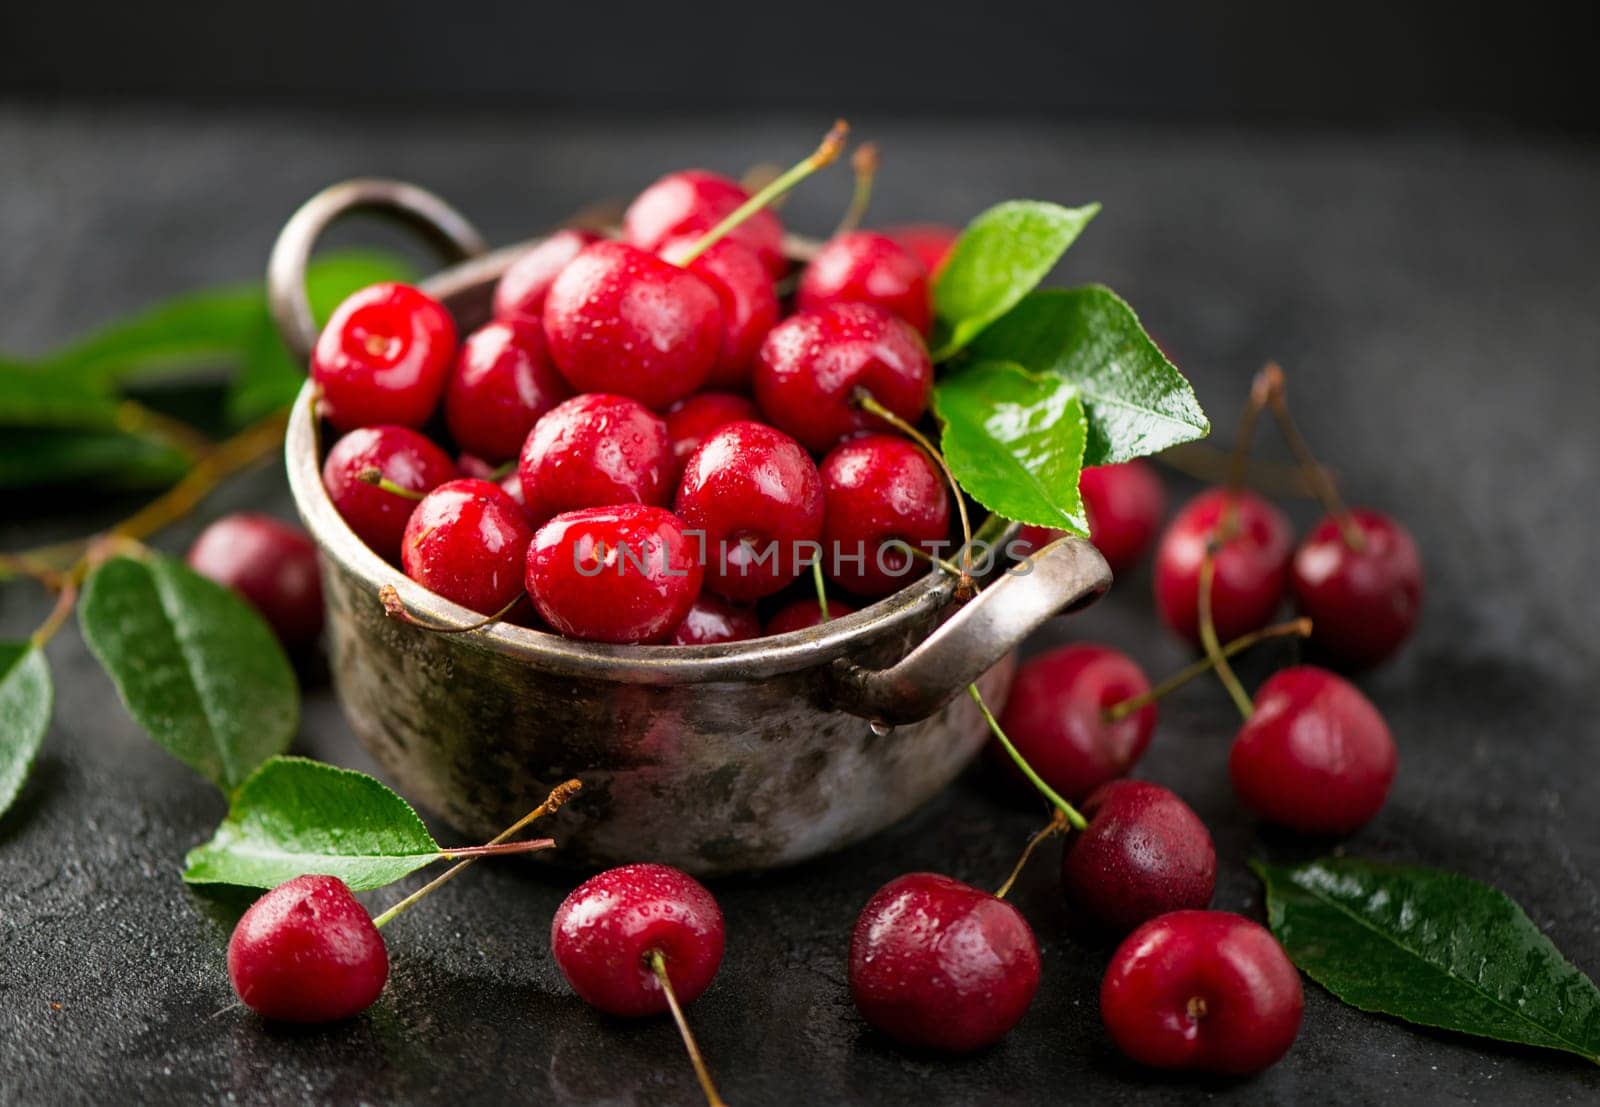 Seasonal harvesting of berries and fruits for the winter. Cherry jam. Cherry summer background. A large number of cherries with leaves on the table in a saucepan on a black background. close-up. by aprilphoto